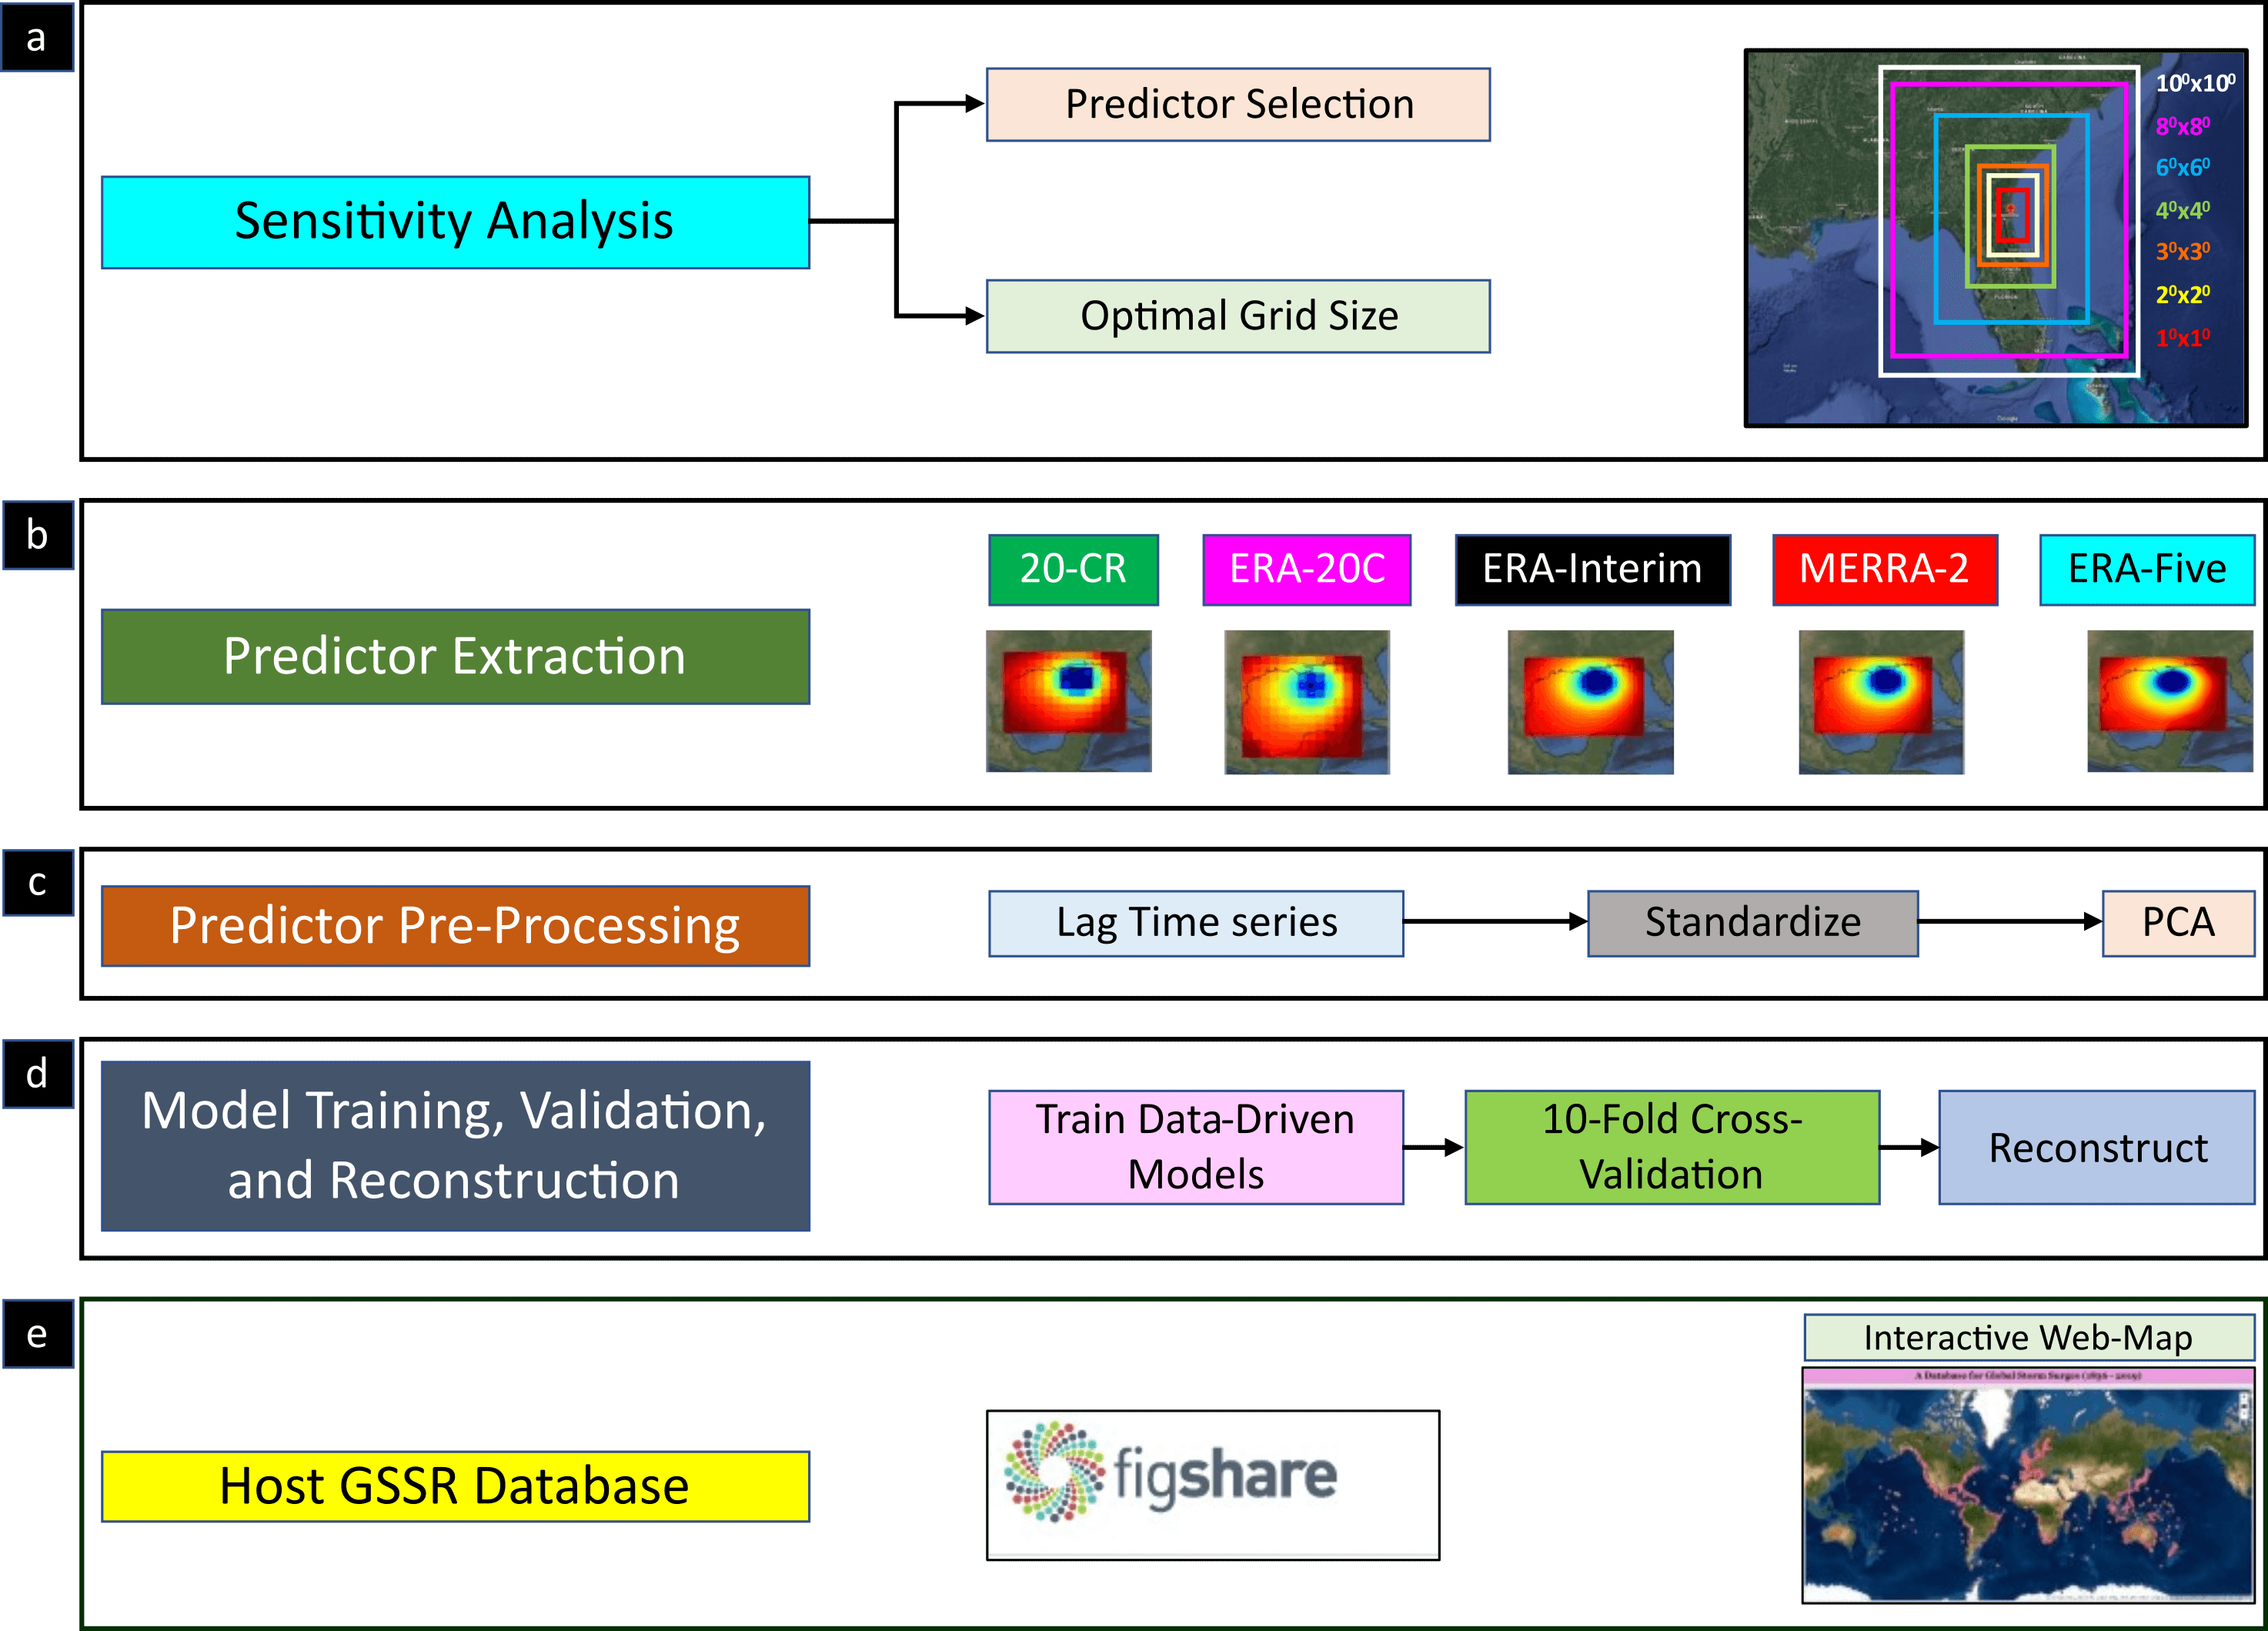 a schematic diagram of the methodology used